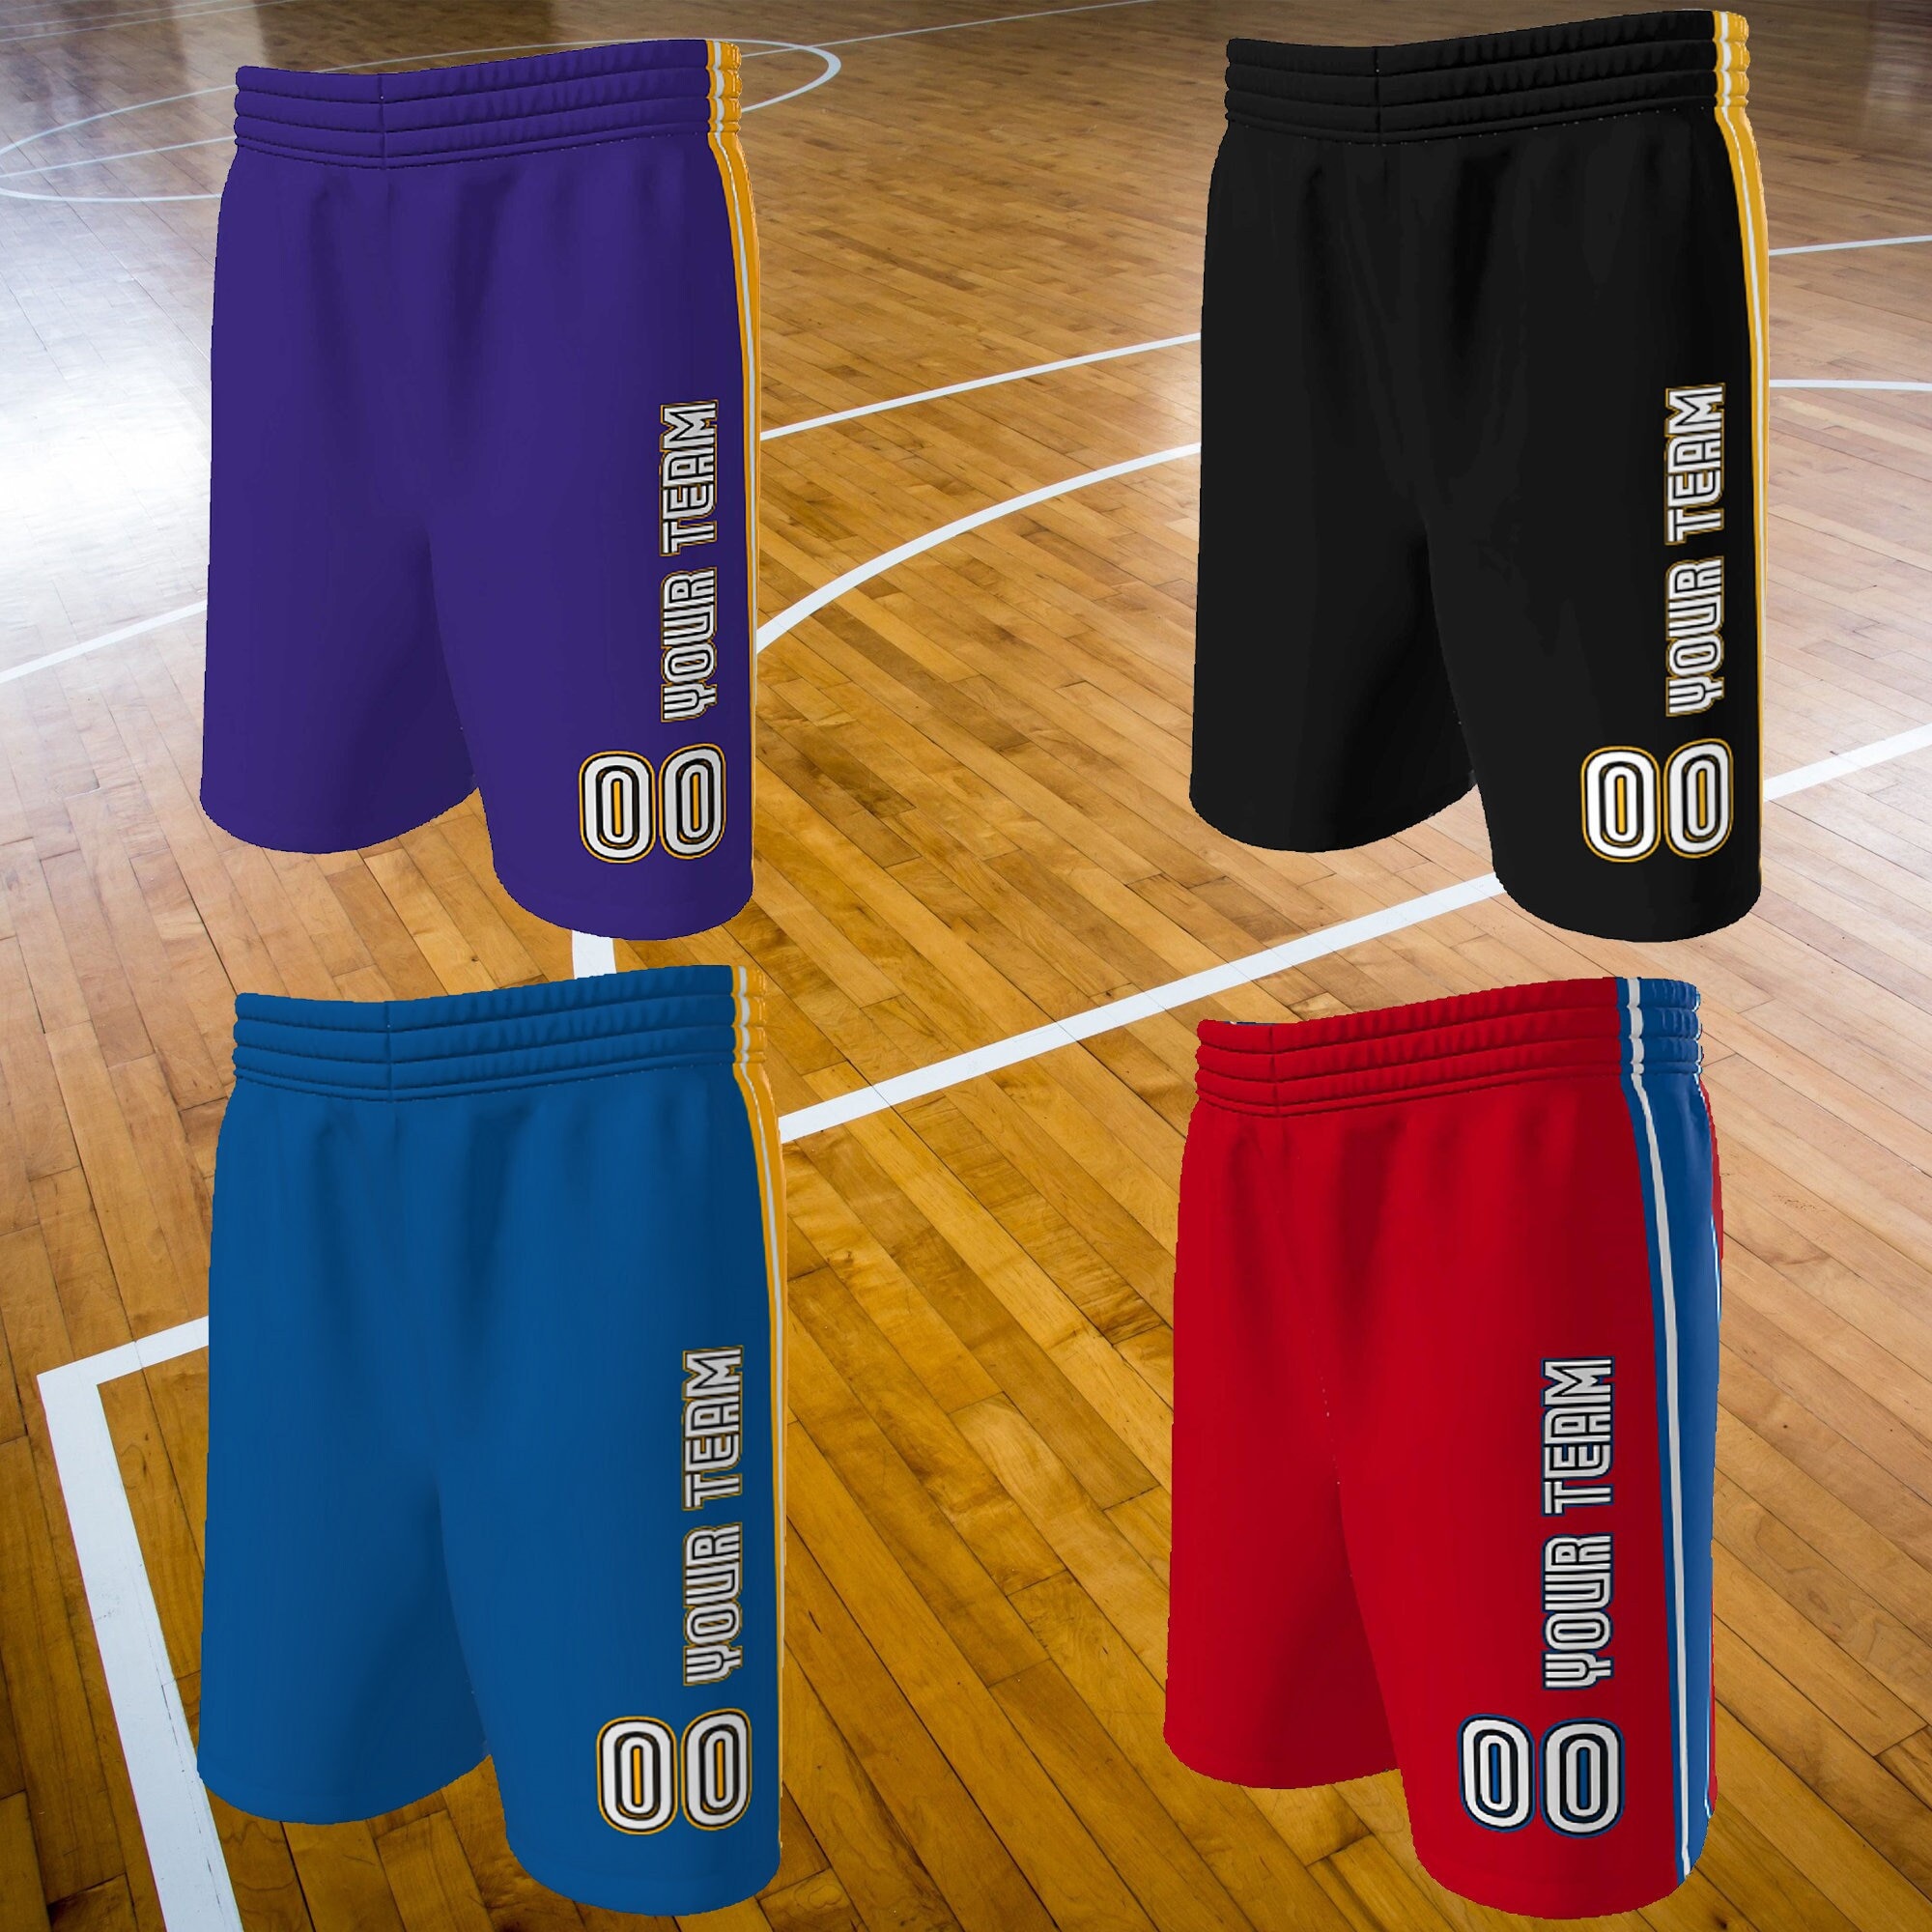 HKsportswear Custom Basketball Jerseys - Old English Old School Style - Order Custom Shorts for A Complete Uniform - Team Name, Player Name & Numbers